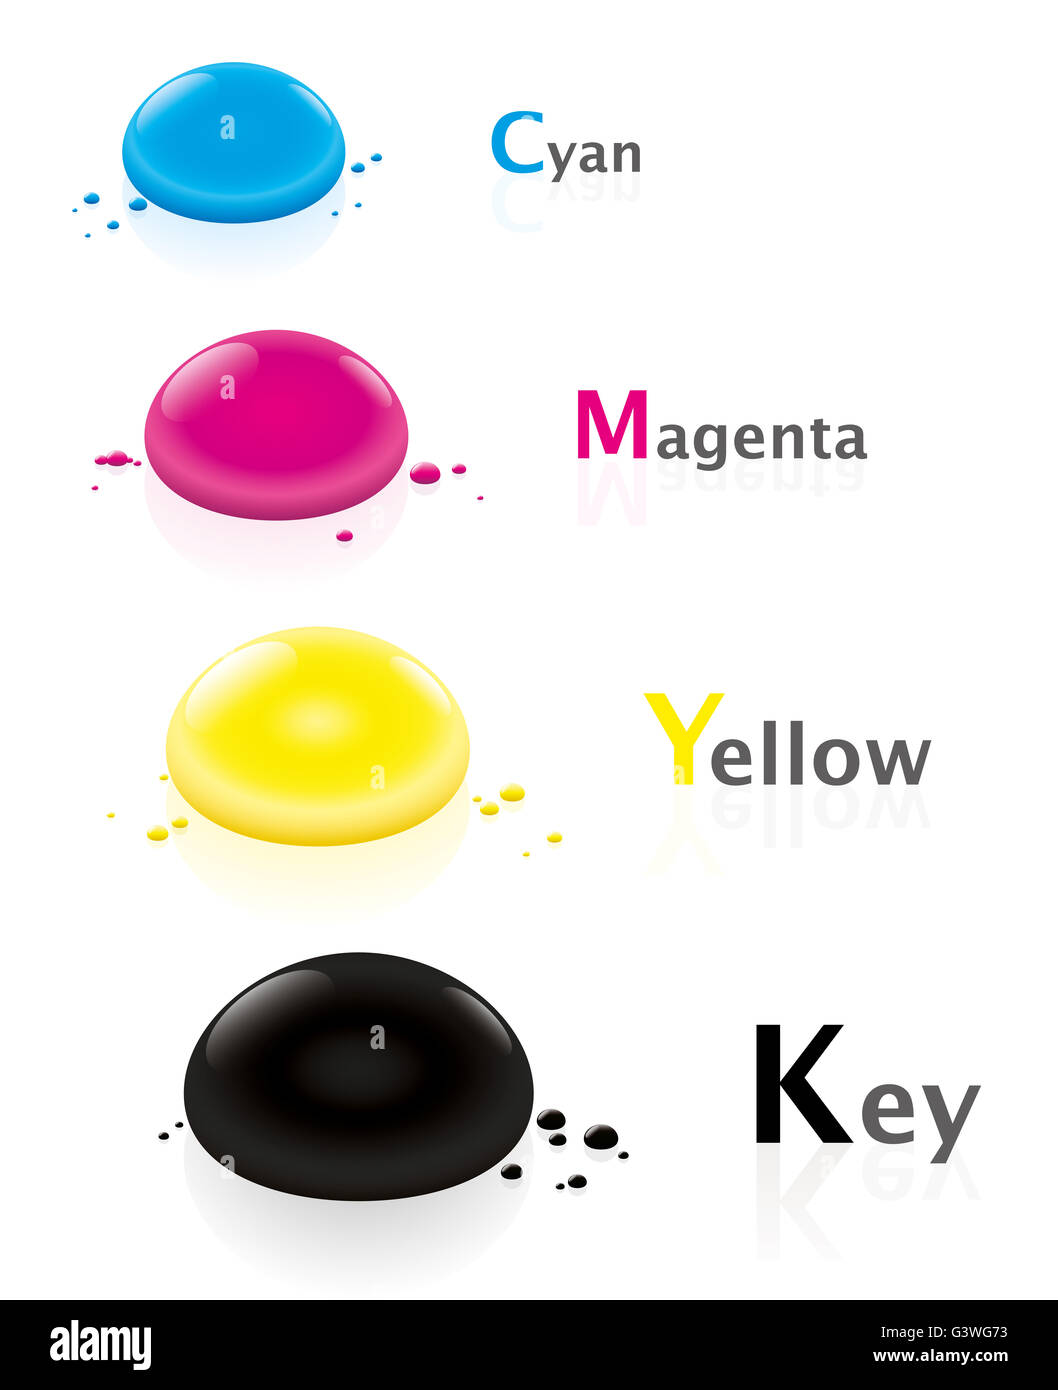 Cyan, magenta, yellow, key - CMYK color model with four ink drops - illustration over white. Stock Photo